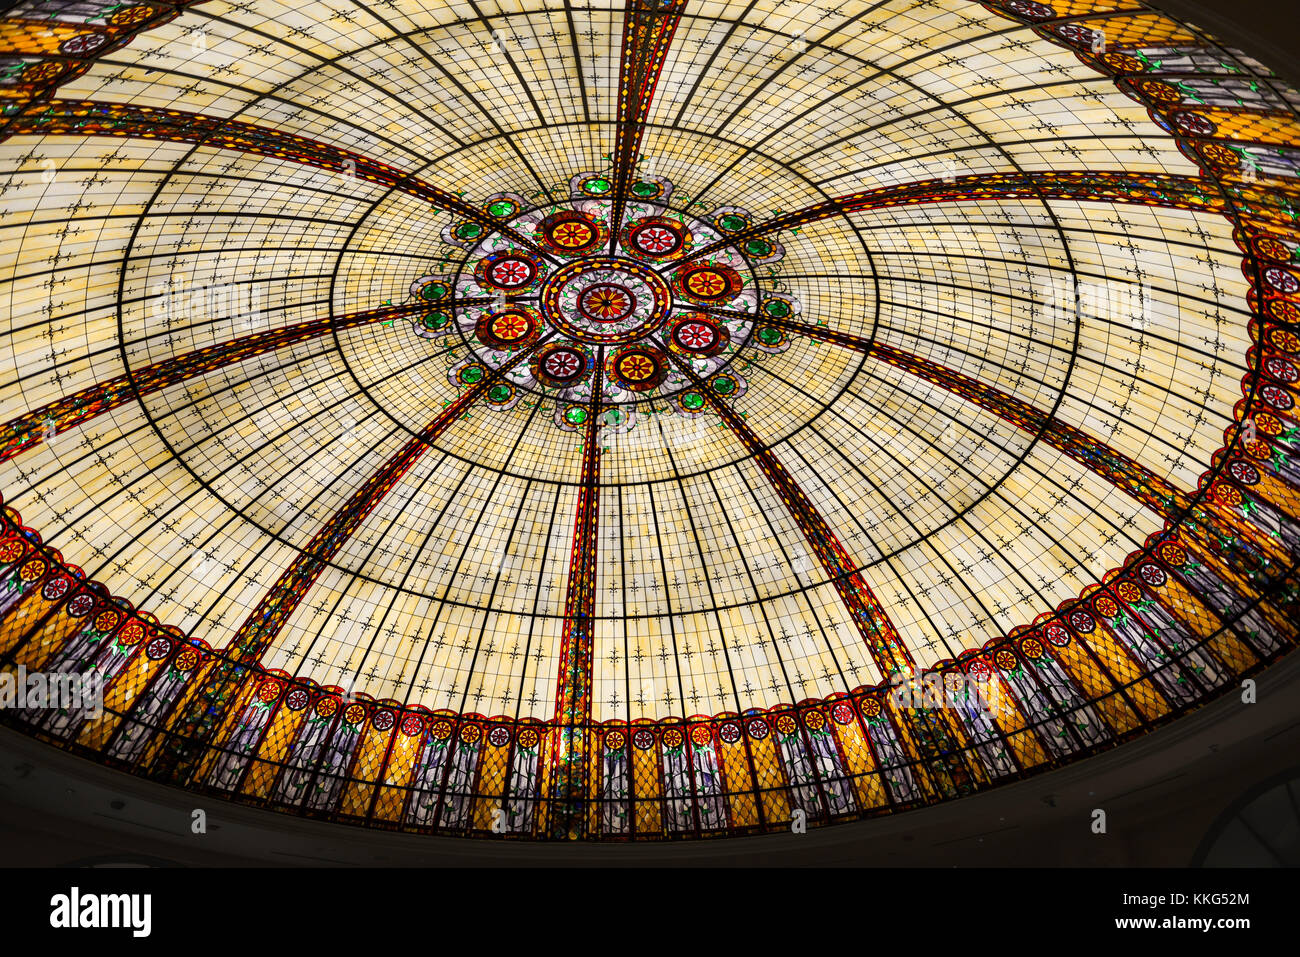 Stained glass dome ceiling in the Paris Resort and Casino in Las Vegas, Nevada Stock Photo